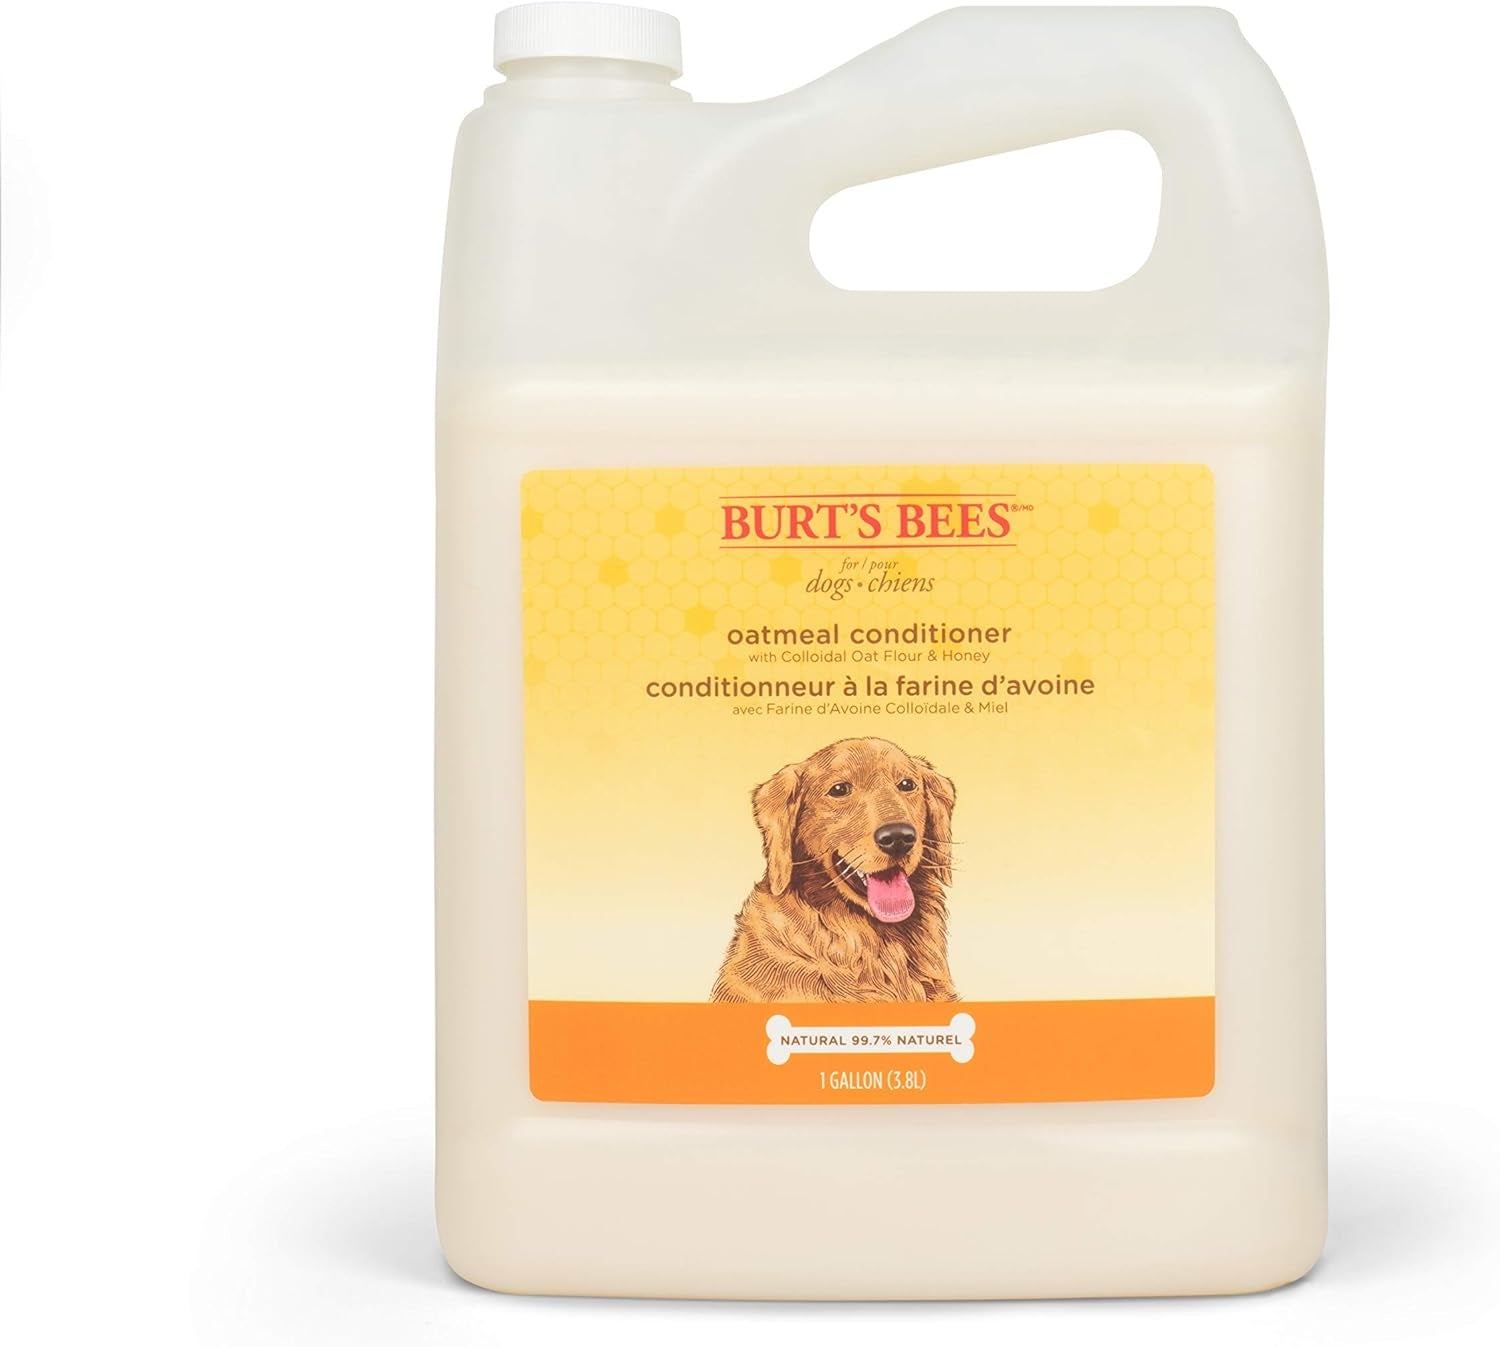 Natural Oatmeal Shampoo with Colloidal Oat Flour and Honey | Oatmeal Dog Shampoo, 1 Gallon | Cruelty Free, Sulfate & Paraben Free, Soothing Dog Shampoo for All Dogs,Beige